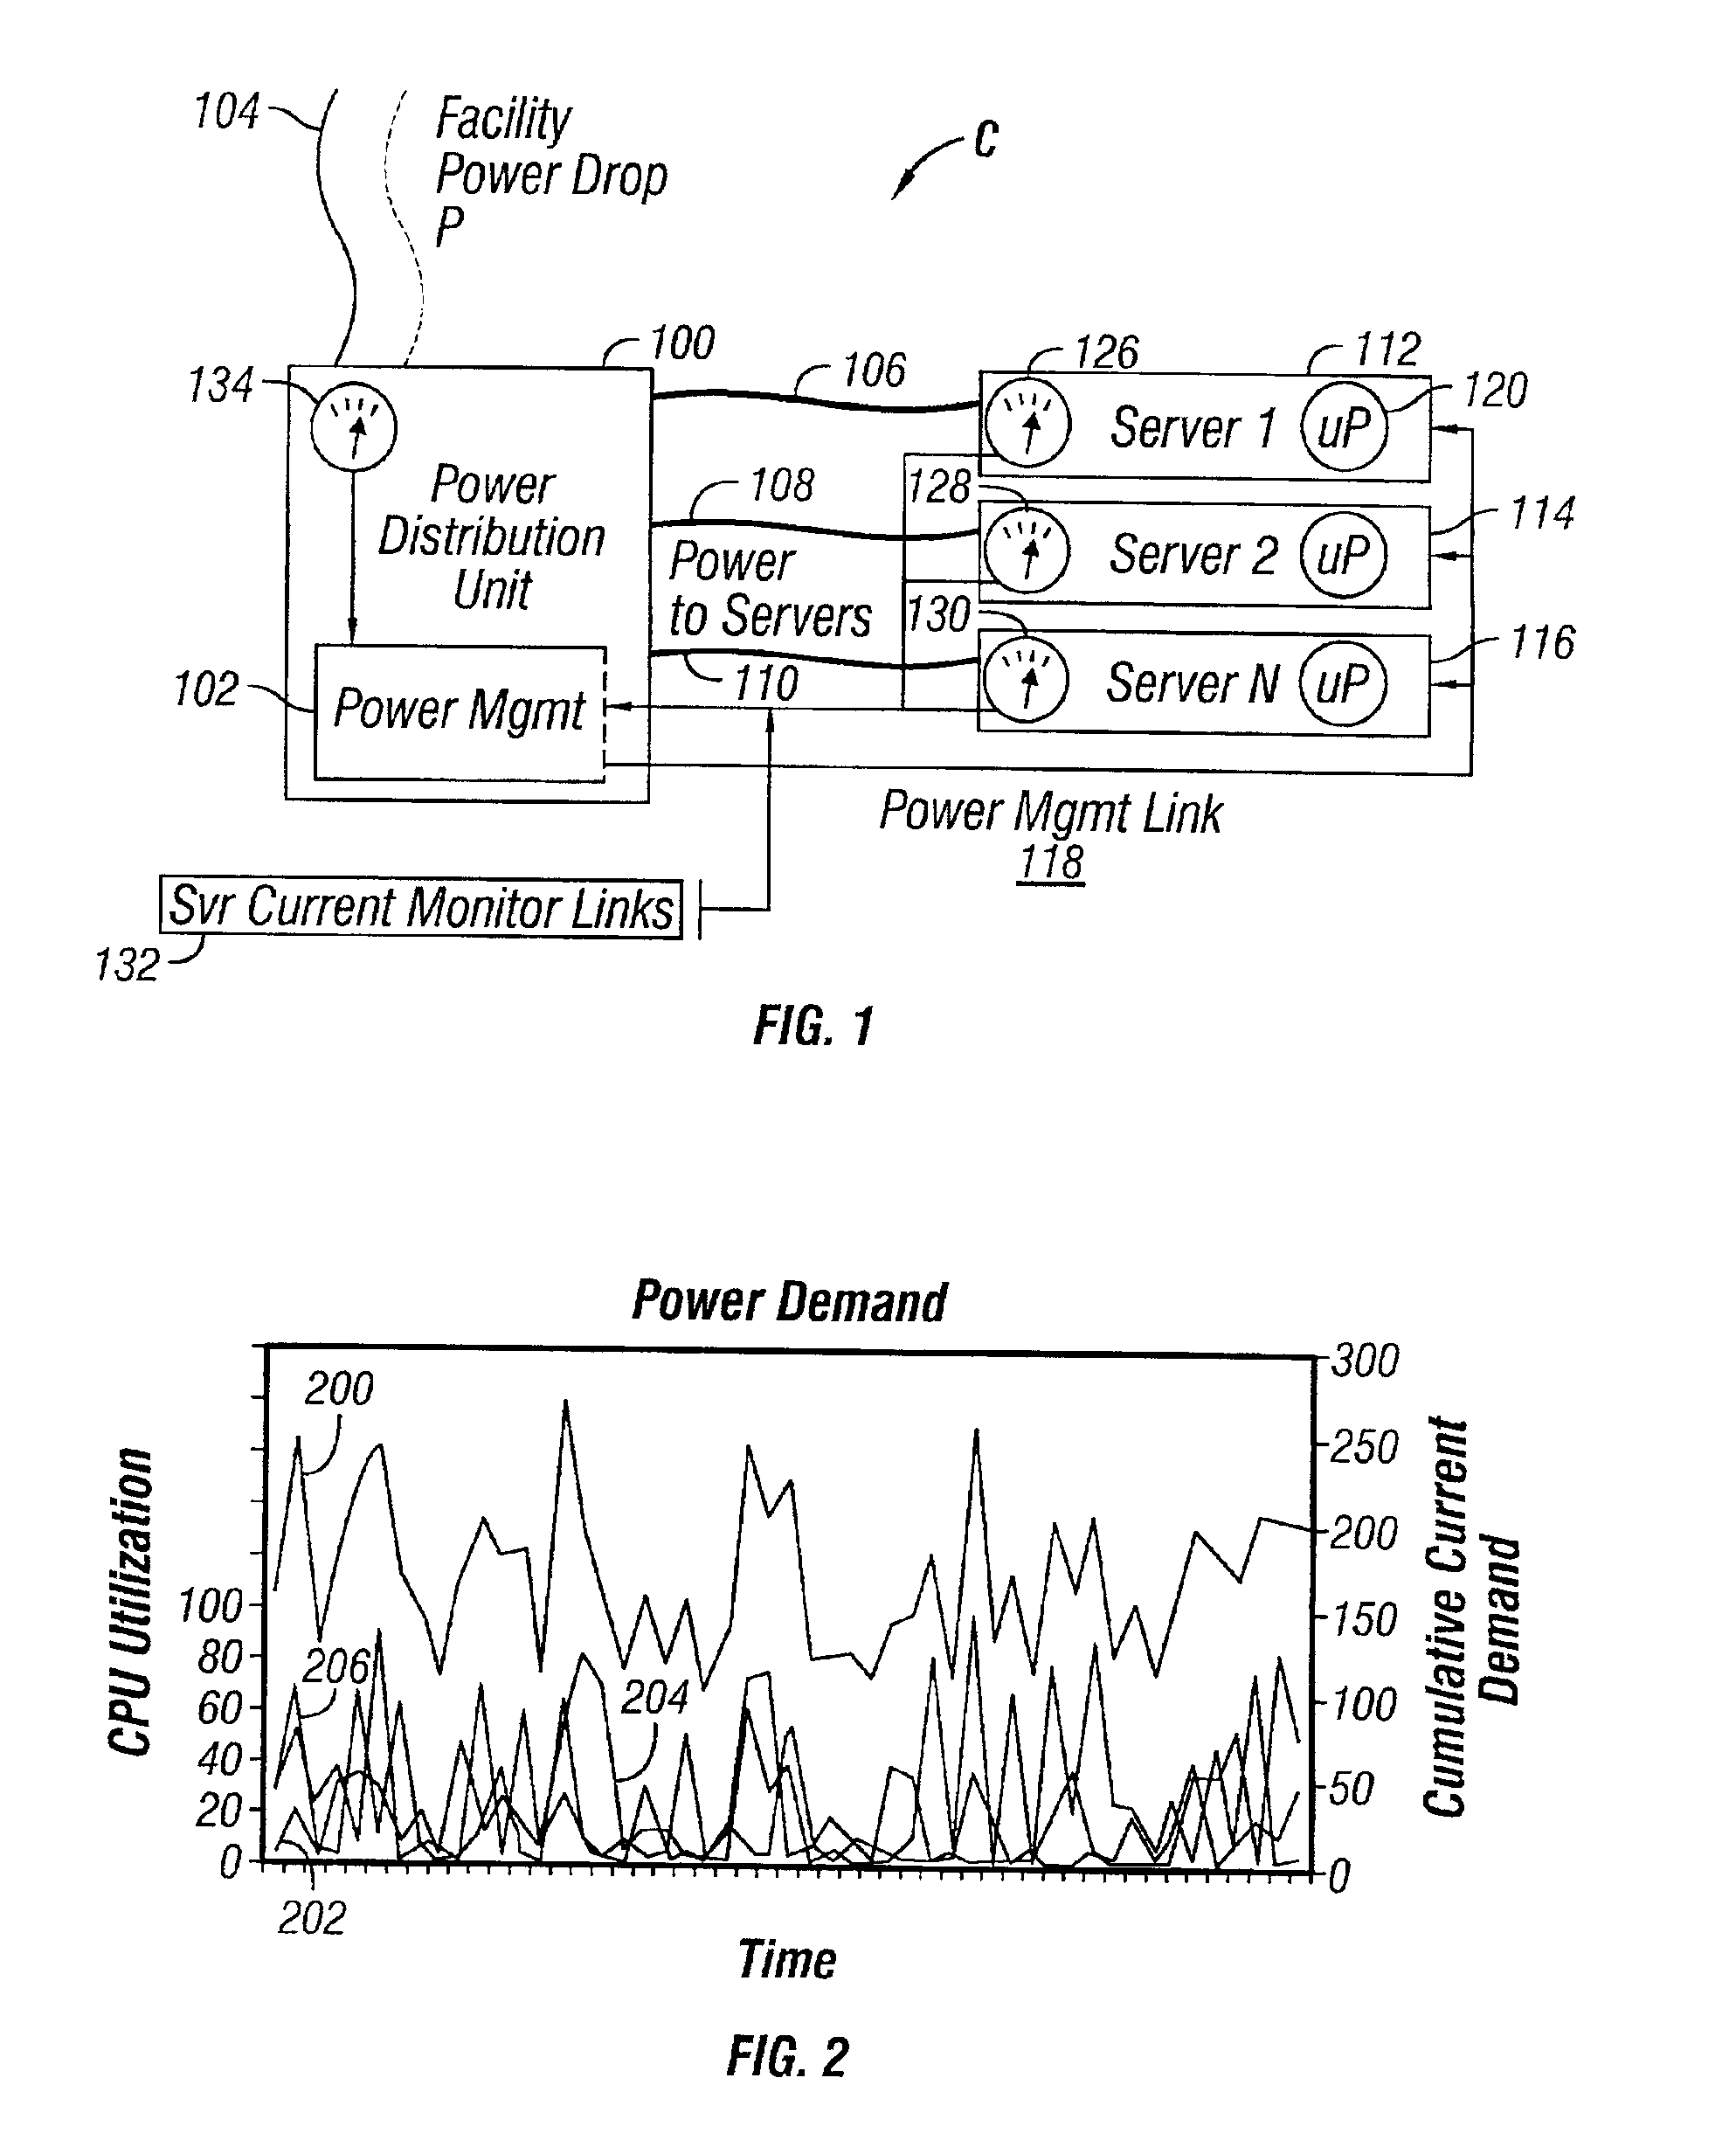 Progressive CPU sleep state duty cycle to limit peak power of multiple computers on shared power distribution unit